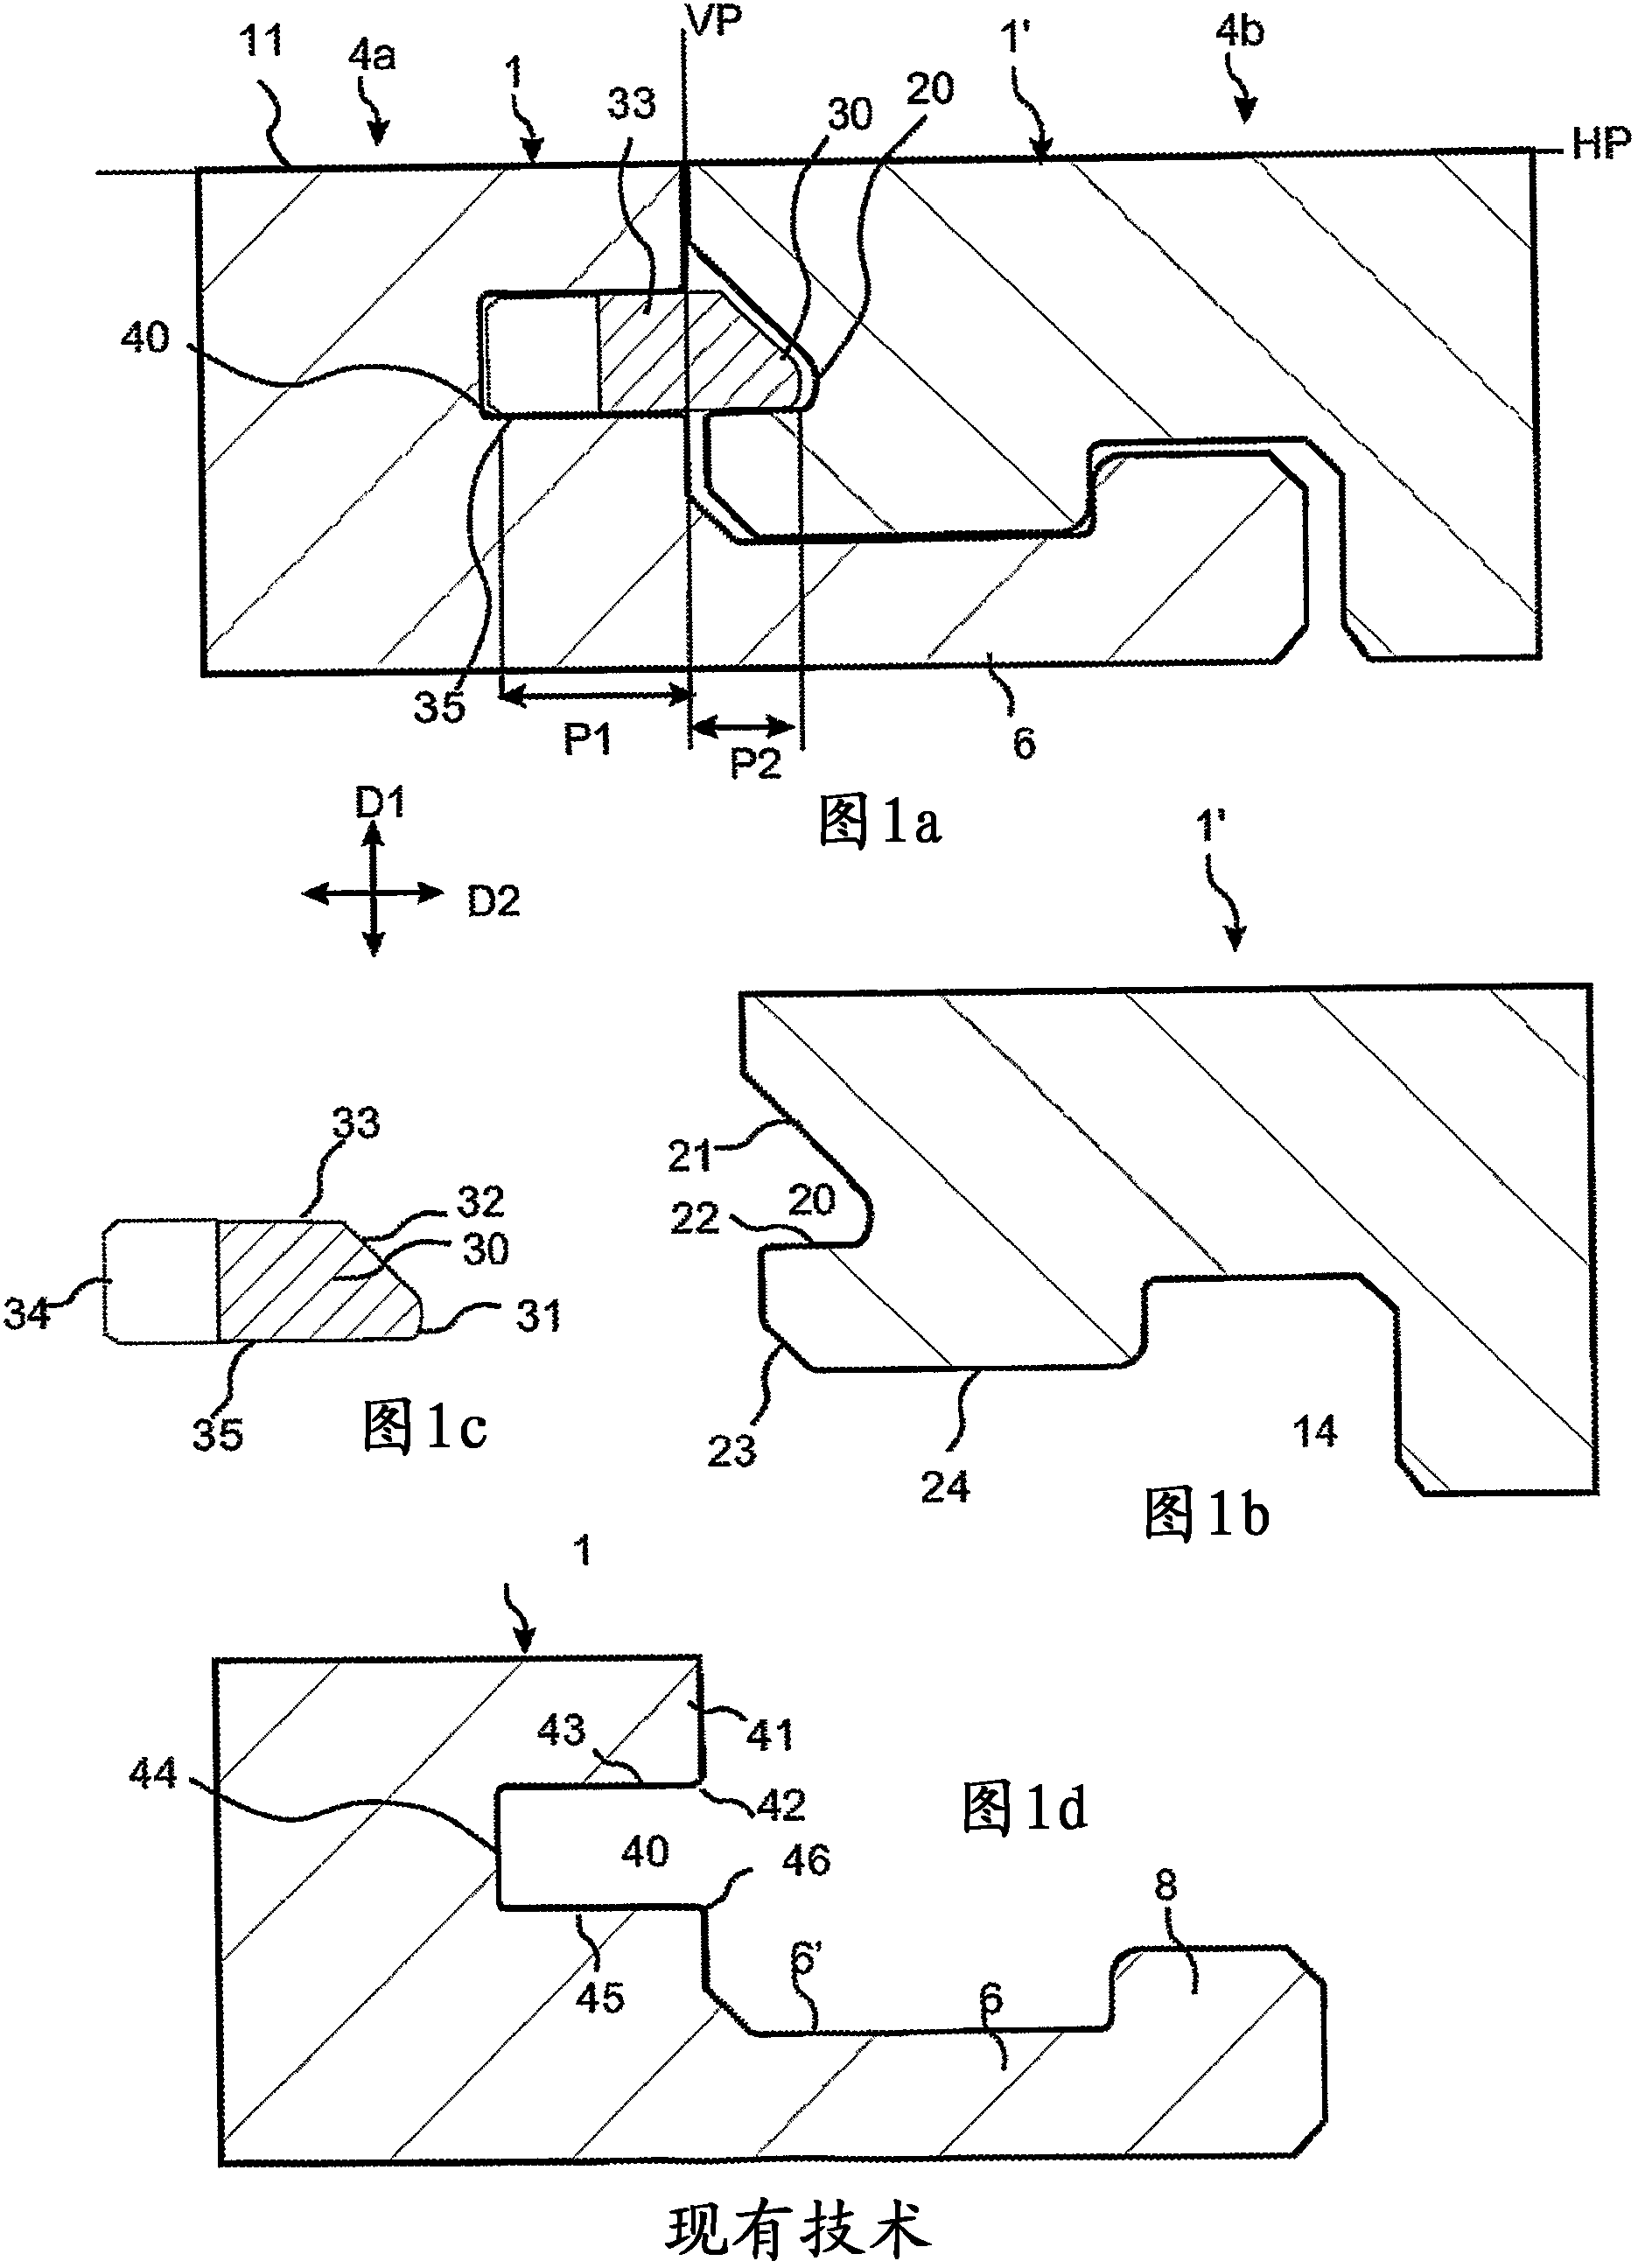 Mechanical locking of floor panels with vertical folding